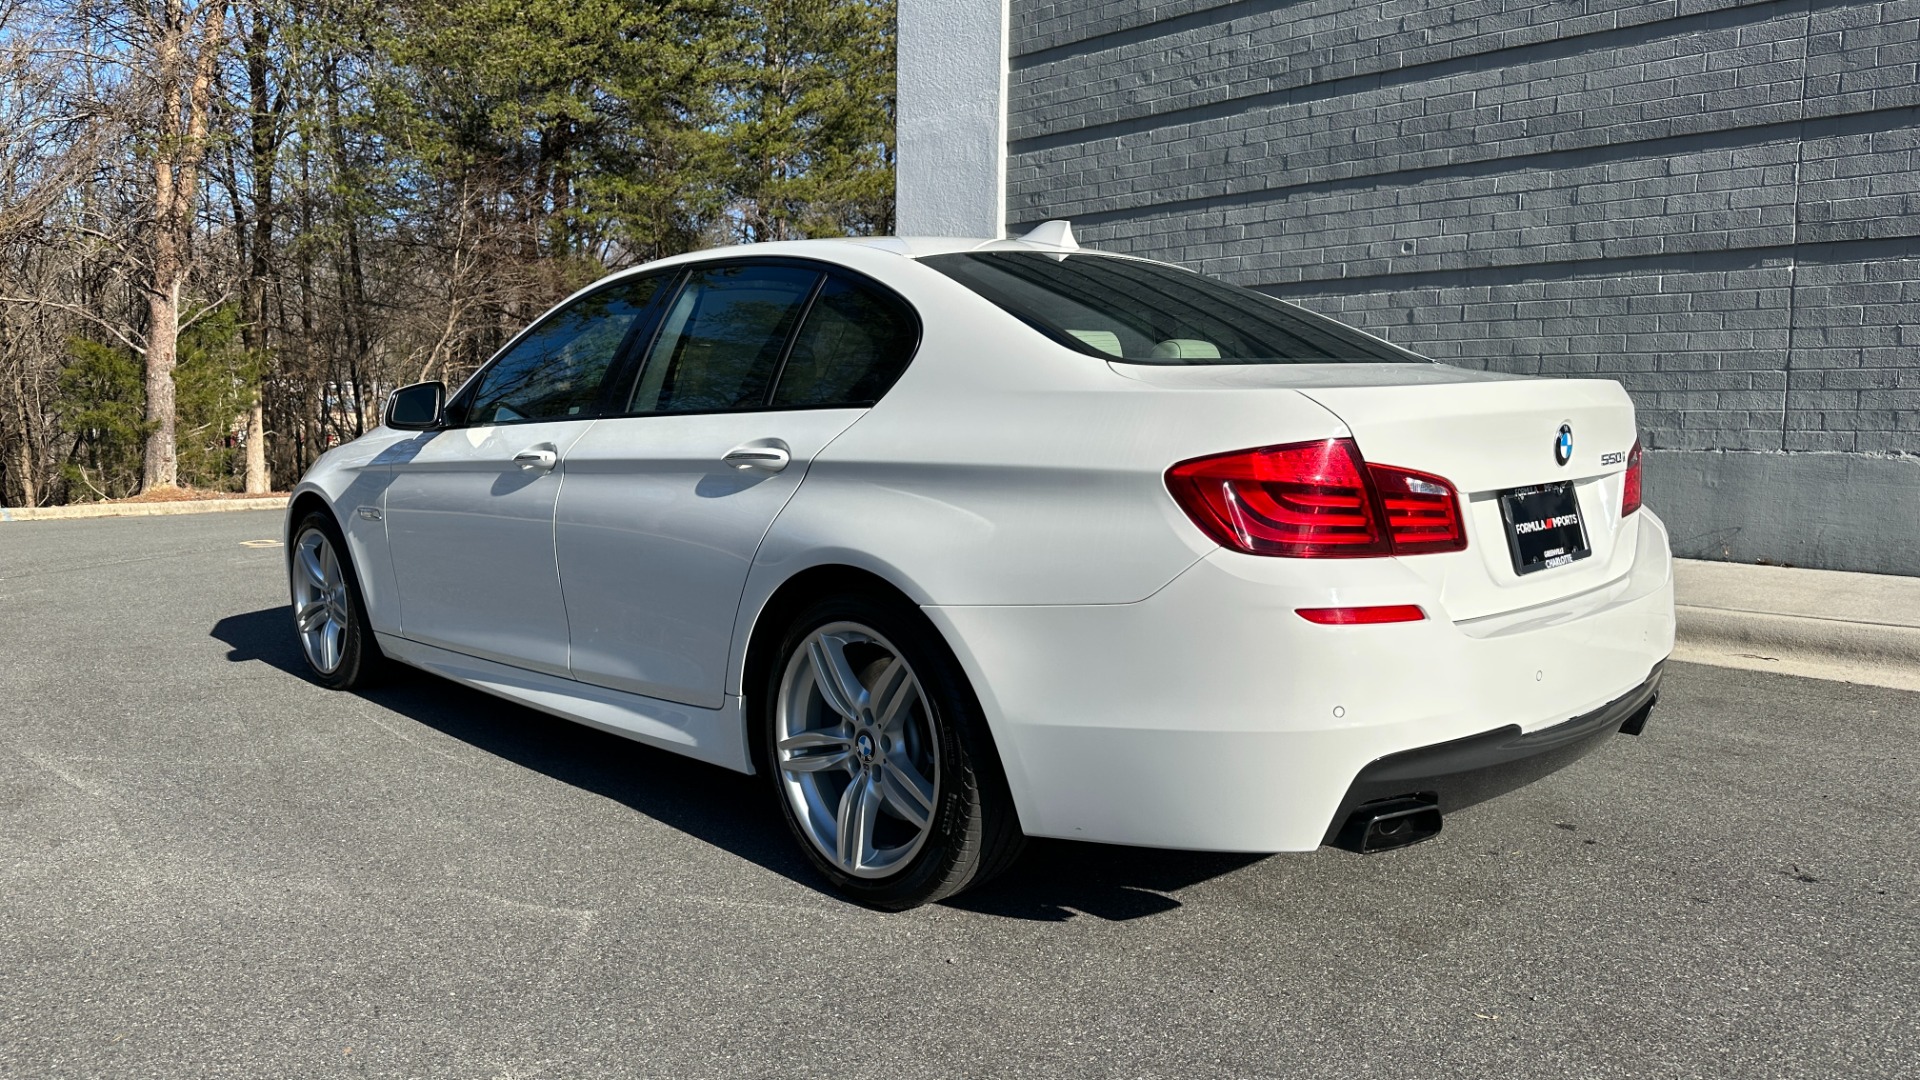 Used 2012 BMW 5 Series 550i M SPORT / PREMIUM SOUND / CONVENIENCE / HEADS UP DISPLAY / HEATED SEAT for sale $20,995 at Formula Imports in Charlotte NC 28227 4